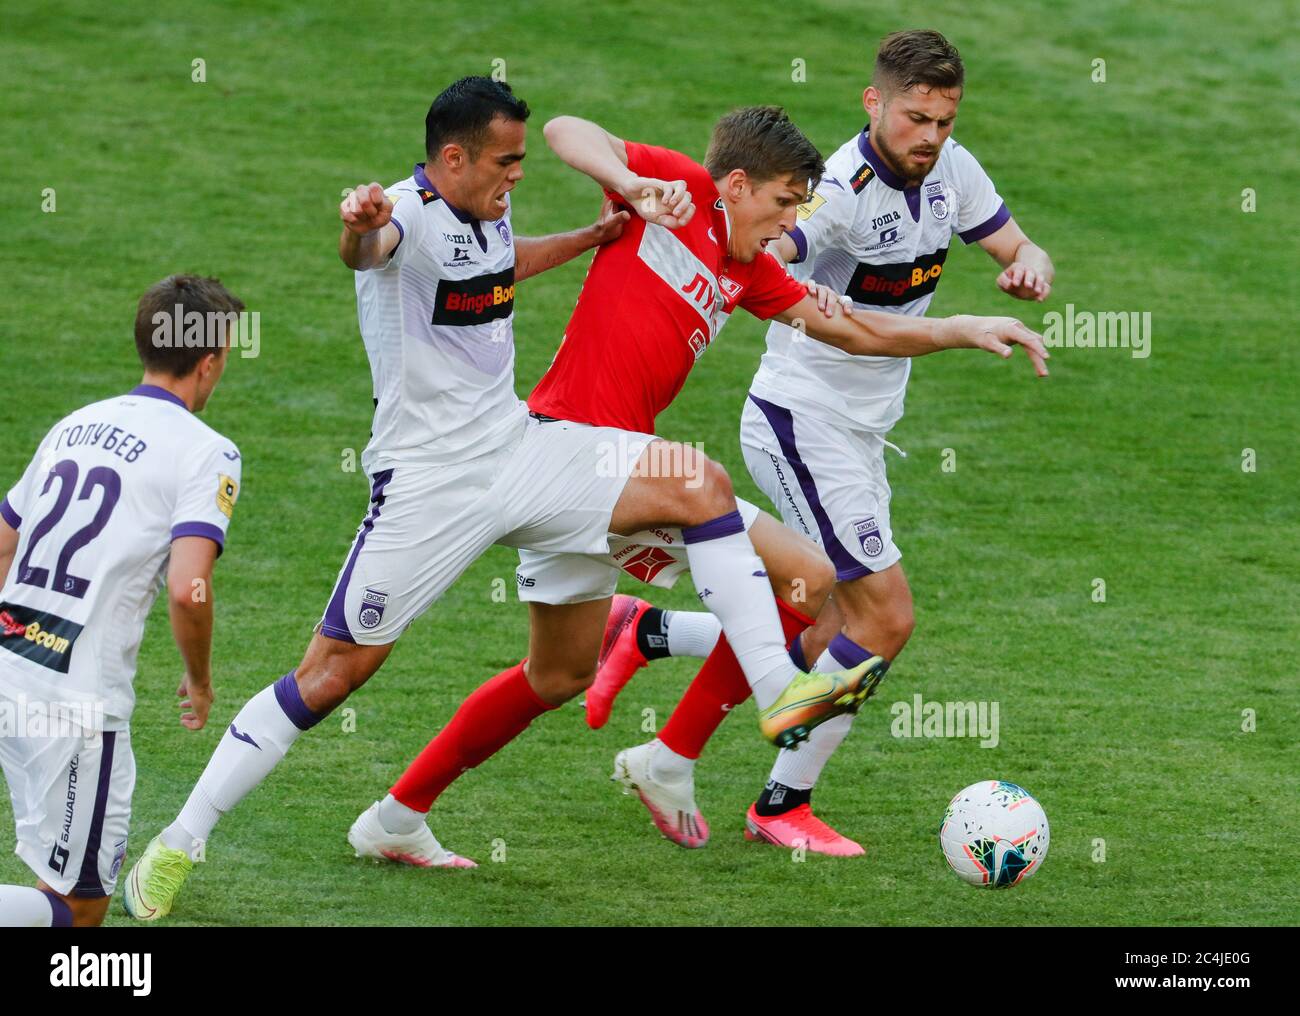 Moscow, Russia. 27th June, 2020. FC Ufa's Oston Urunov, FC Spartak Moscow's  Roman Zobnin and FC Ufa's Catalin Carp (L-R background) fight for the ball  in their 2019/2020 Russian Premier League Round